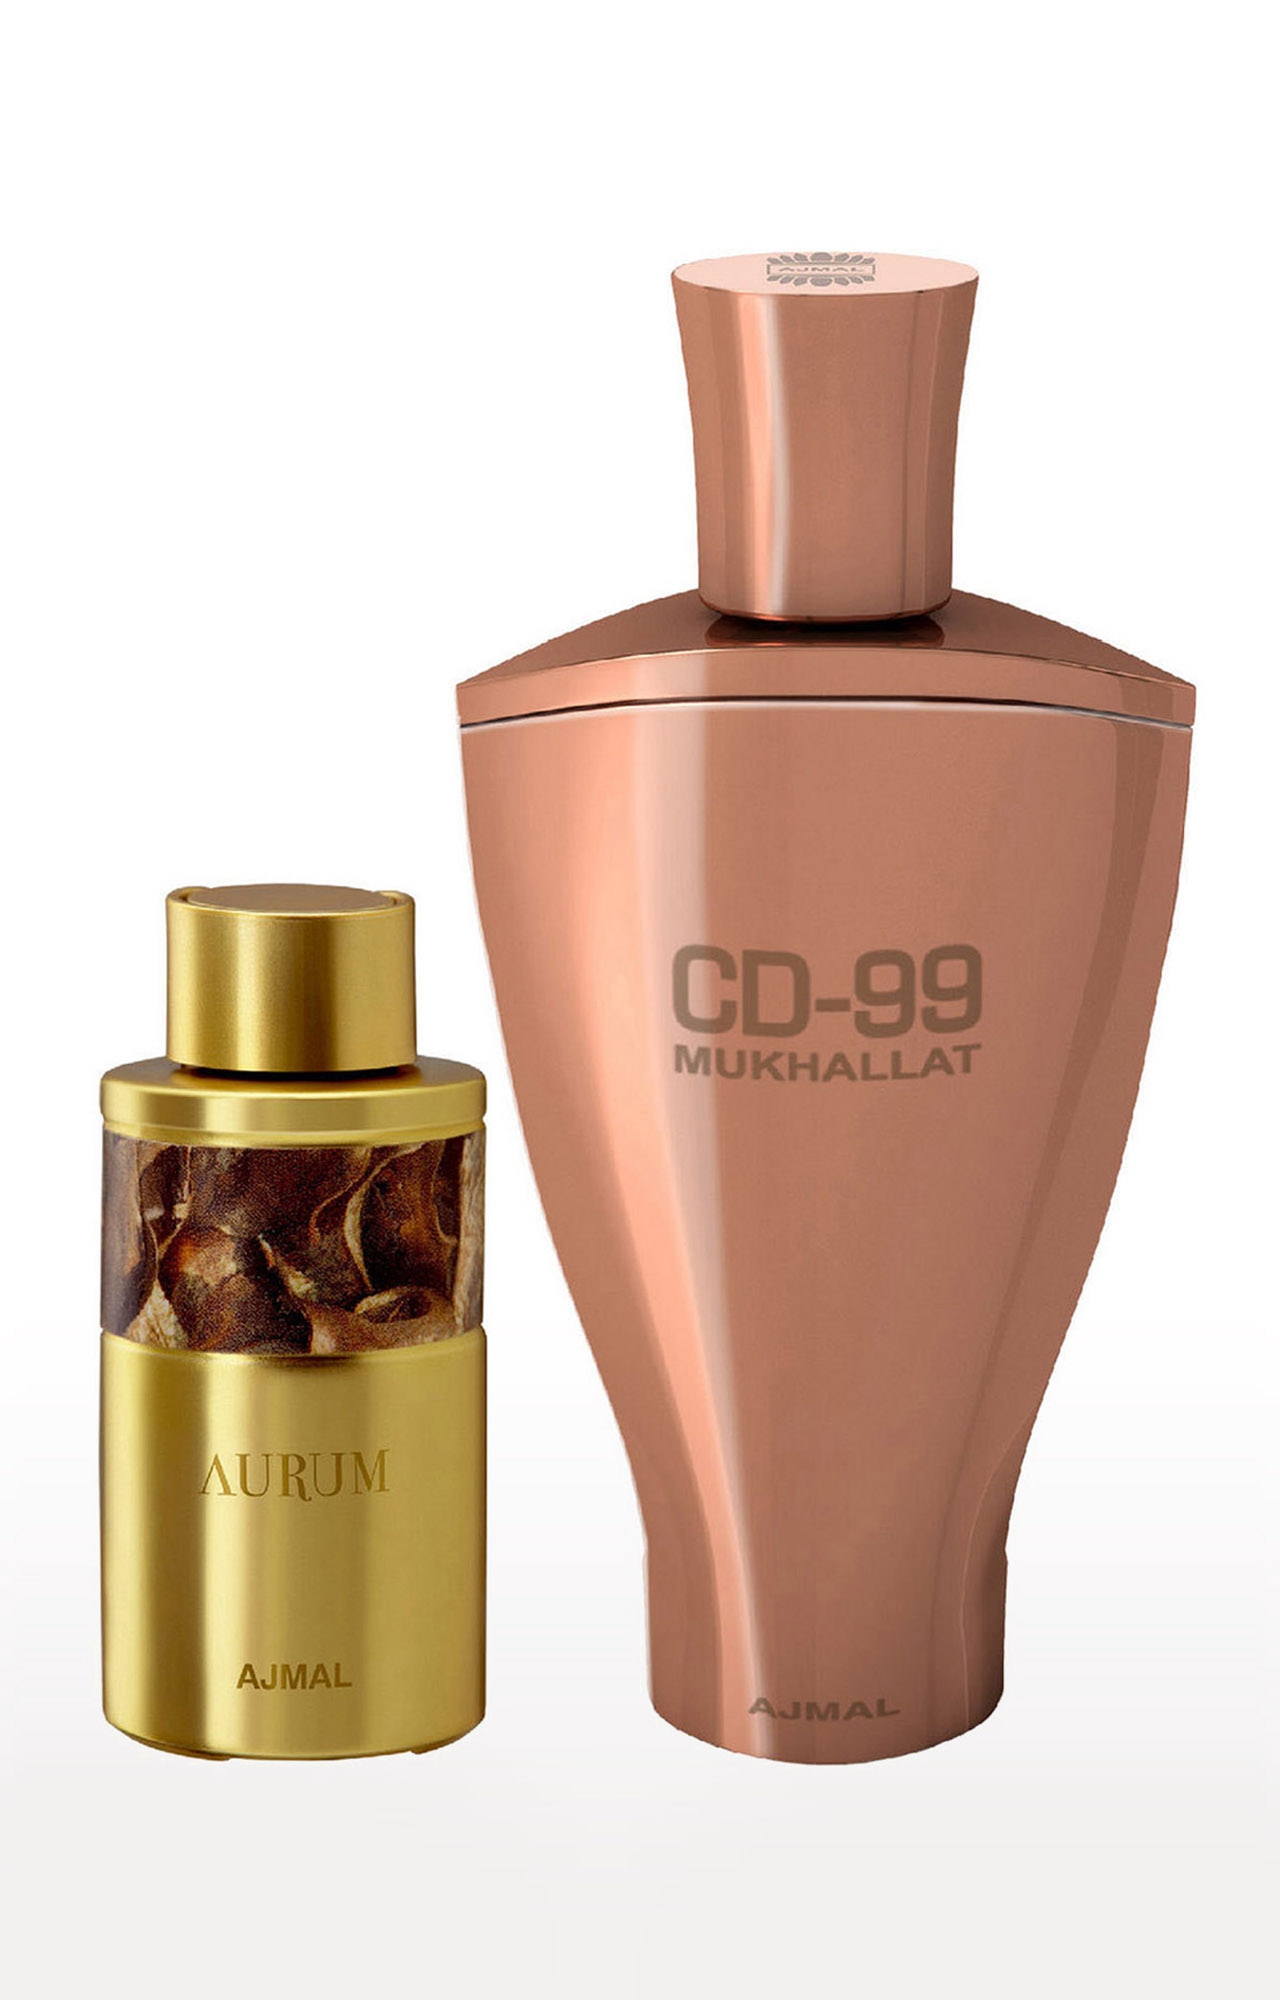 Ajmal Aurum Concentrated Perfume Oil Alcohol-free Attar 10ml for Women and CD 99 Mukhallat Concentrated Perfume Oil Oriental Alcohol-free Attar 14ml for Unisex